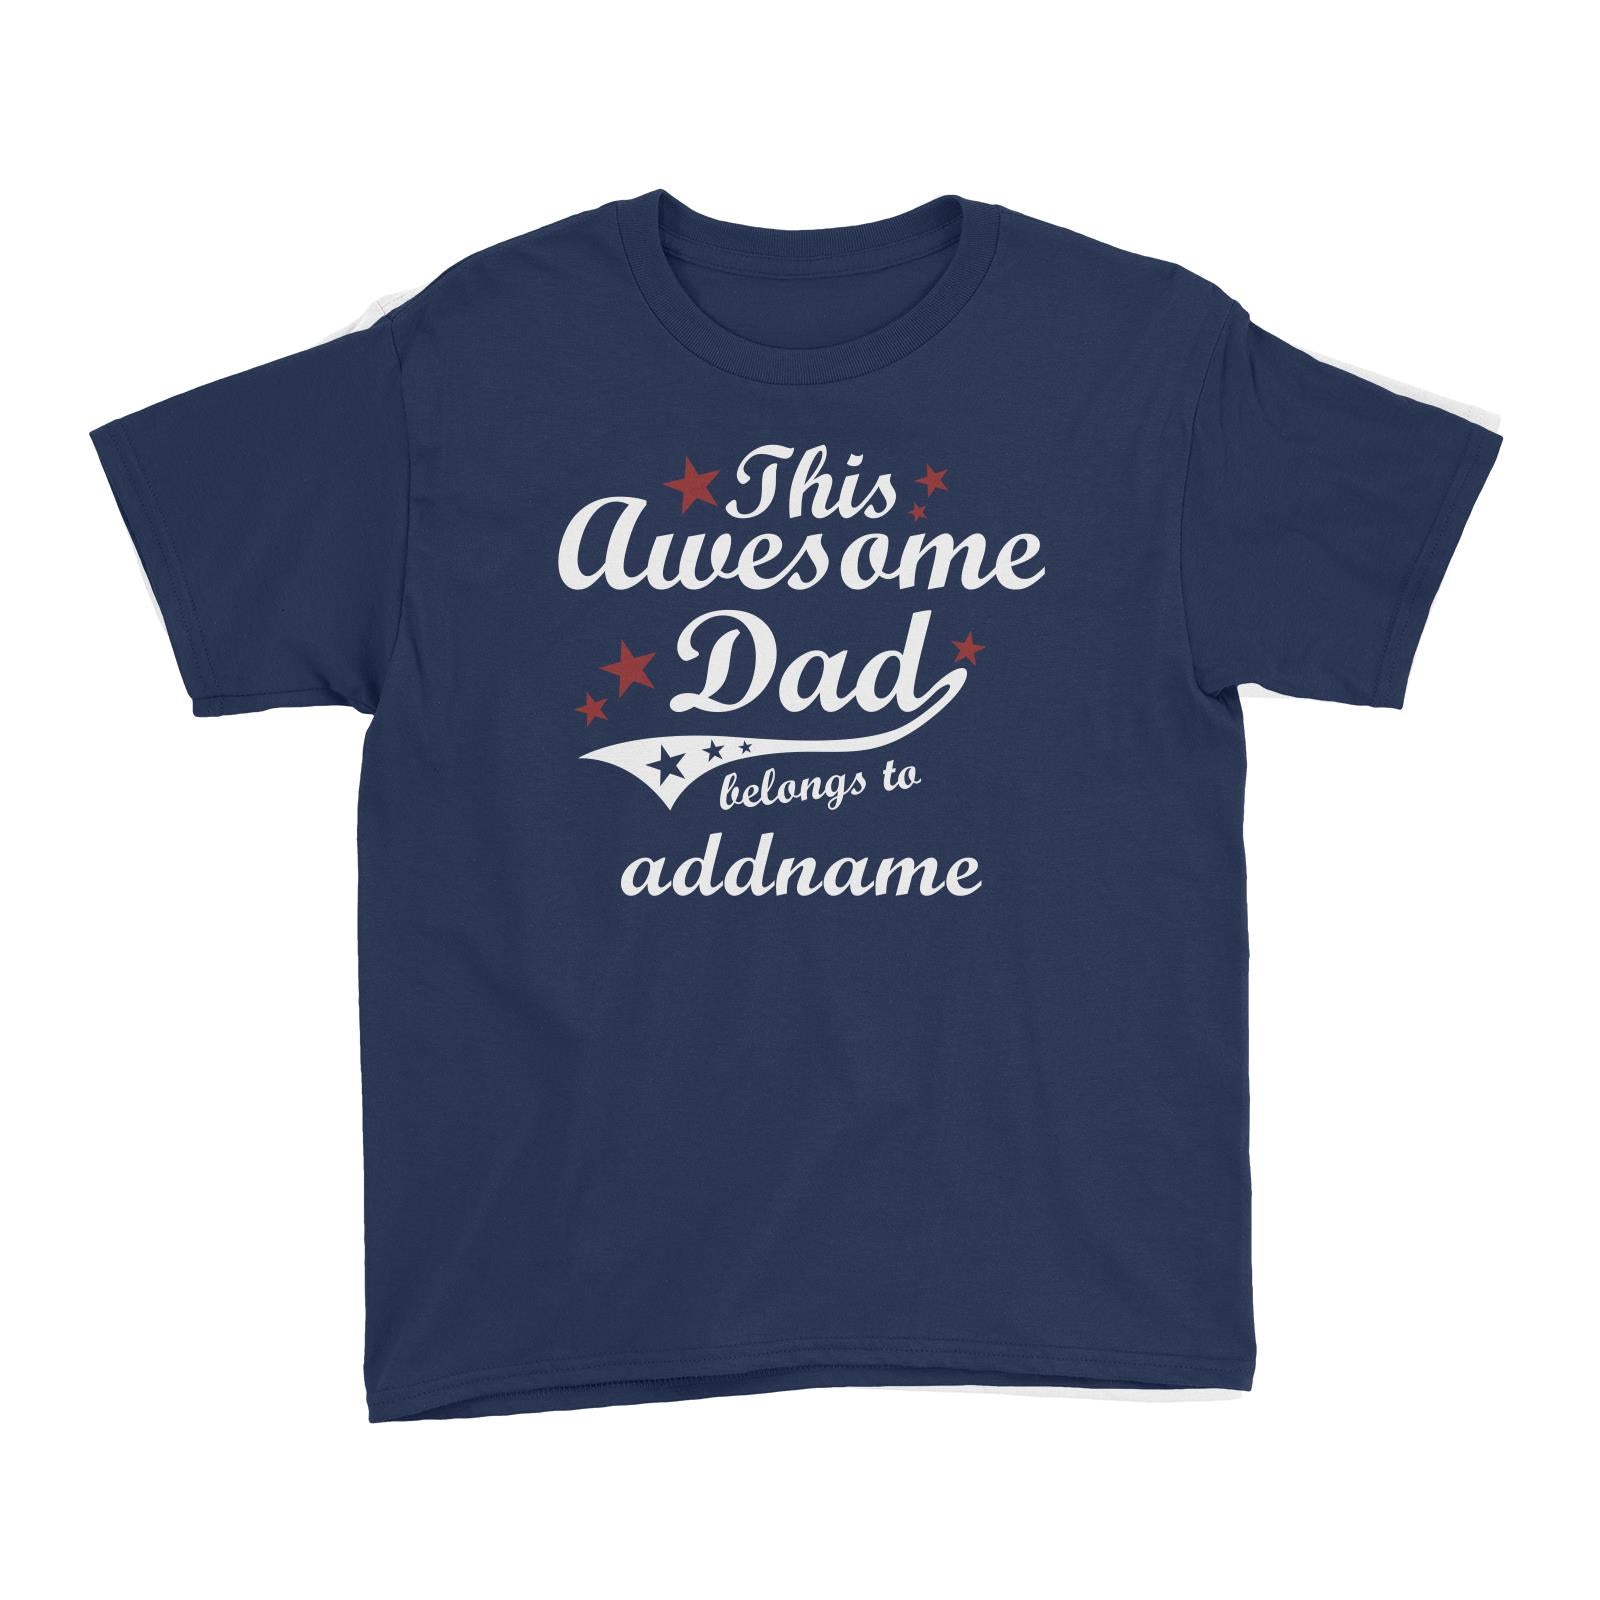 This Awesome Dad Belongs to Addname Kid's T-Shirt